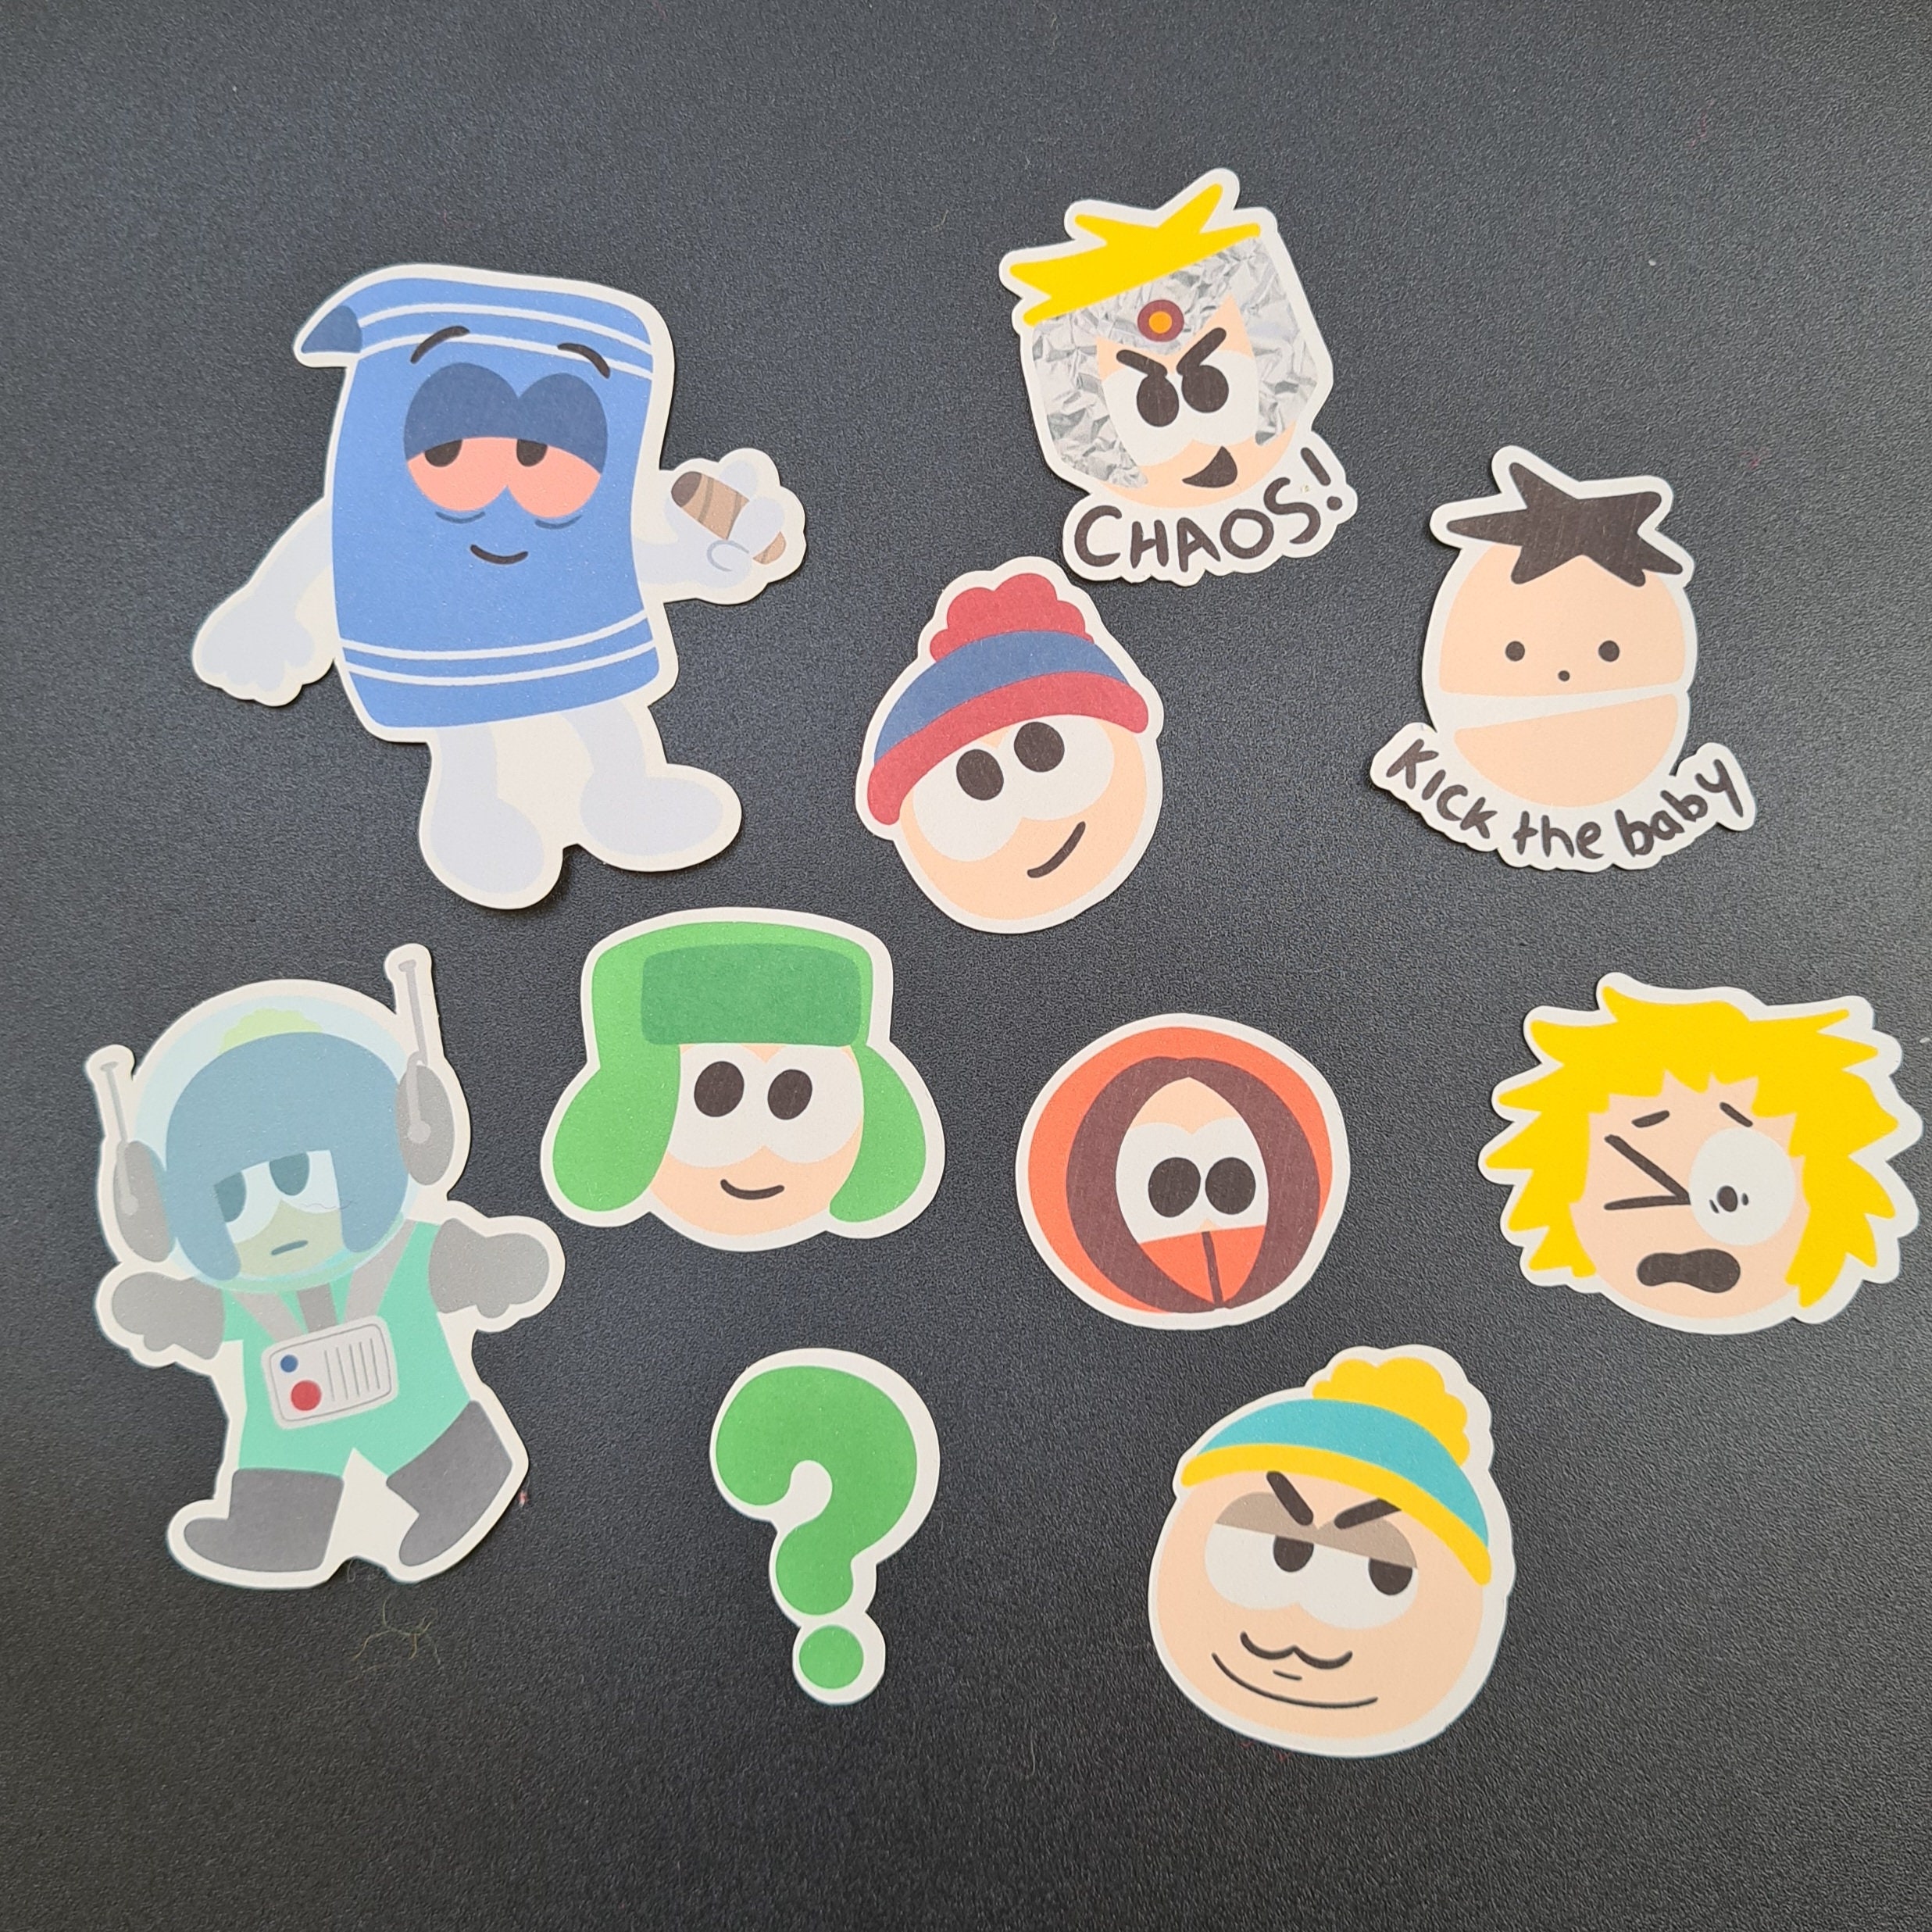 South Park Collection Pins, Animation, Characters, Cartman, Kenny, Kyle,  Stan, Butters, Adult Cartoons,funny, Brooches, Badges, Backpack 